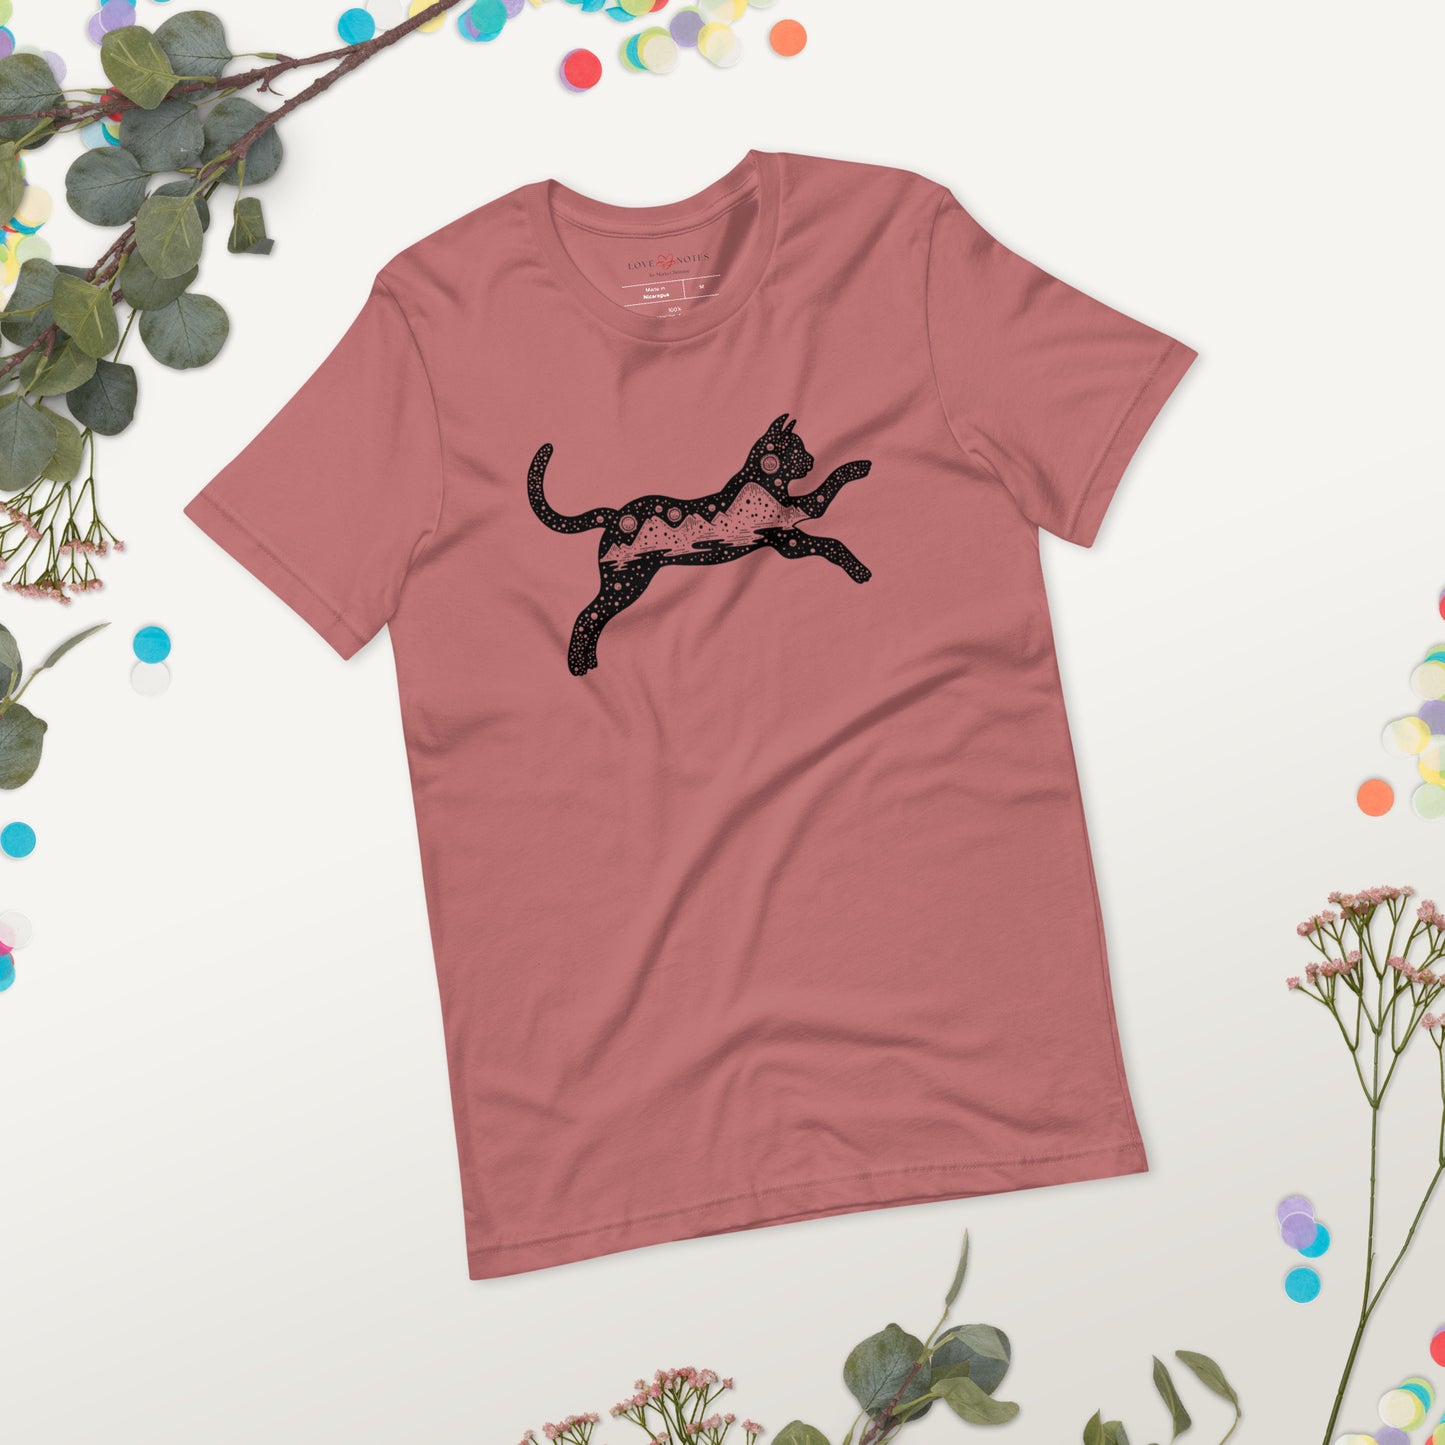 Unisex Tees: Black Cat with Celestial Mountains